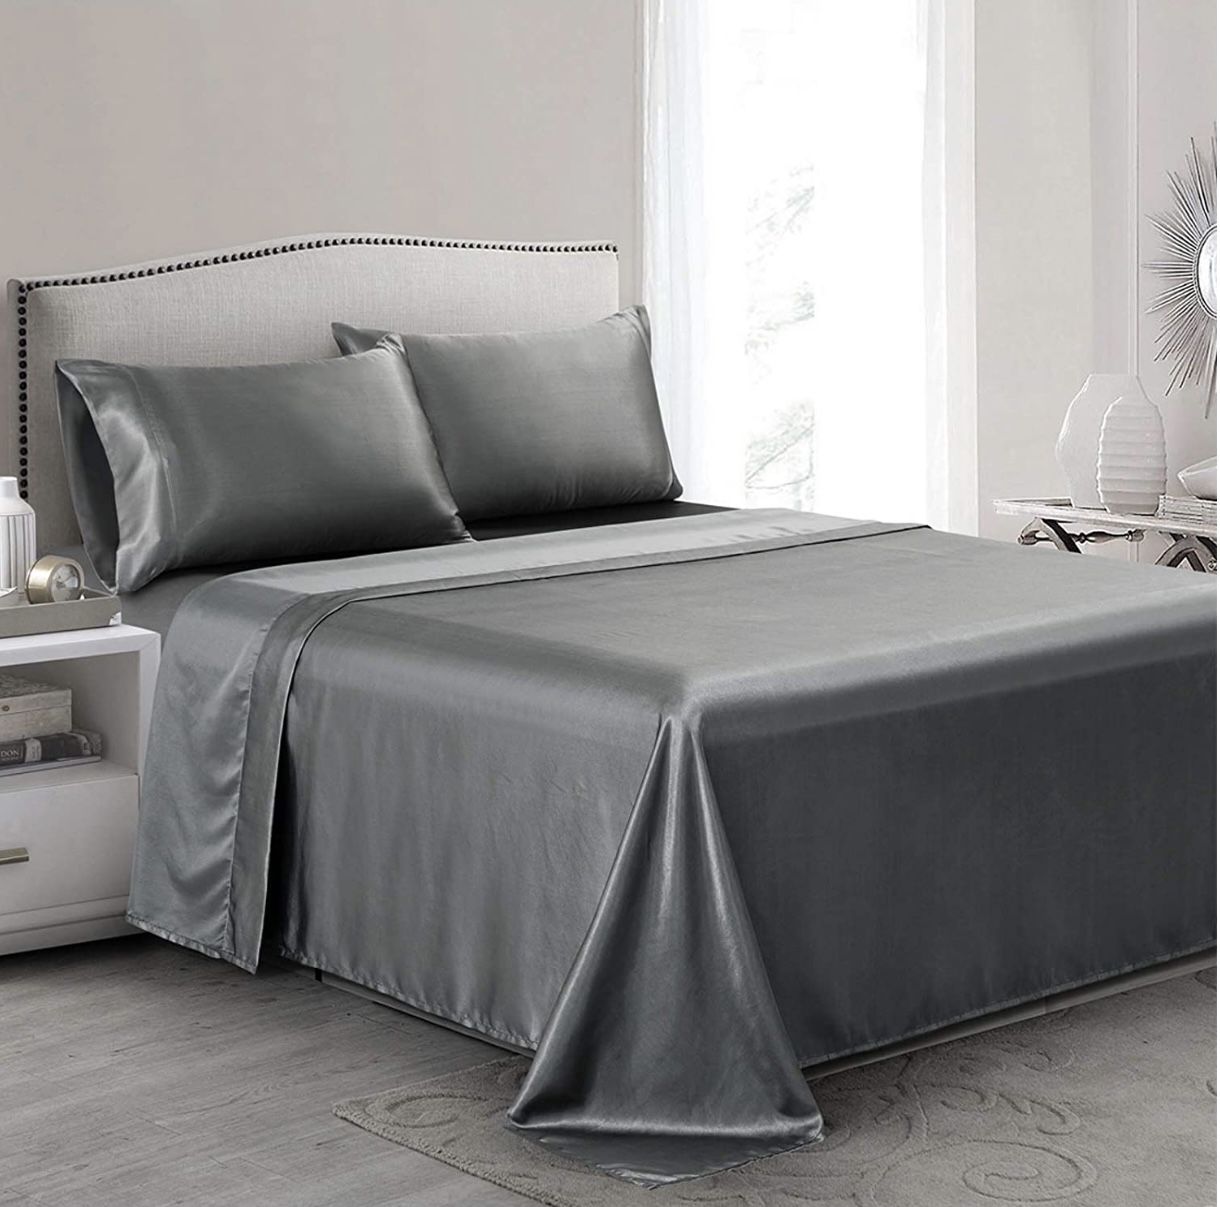 Brand new Satin Bed sheets